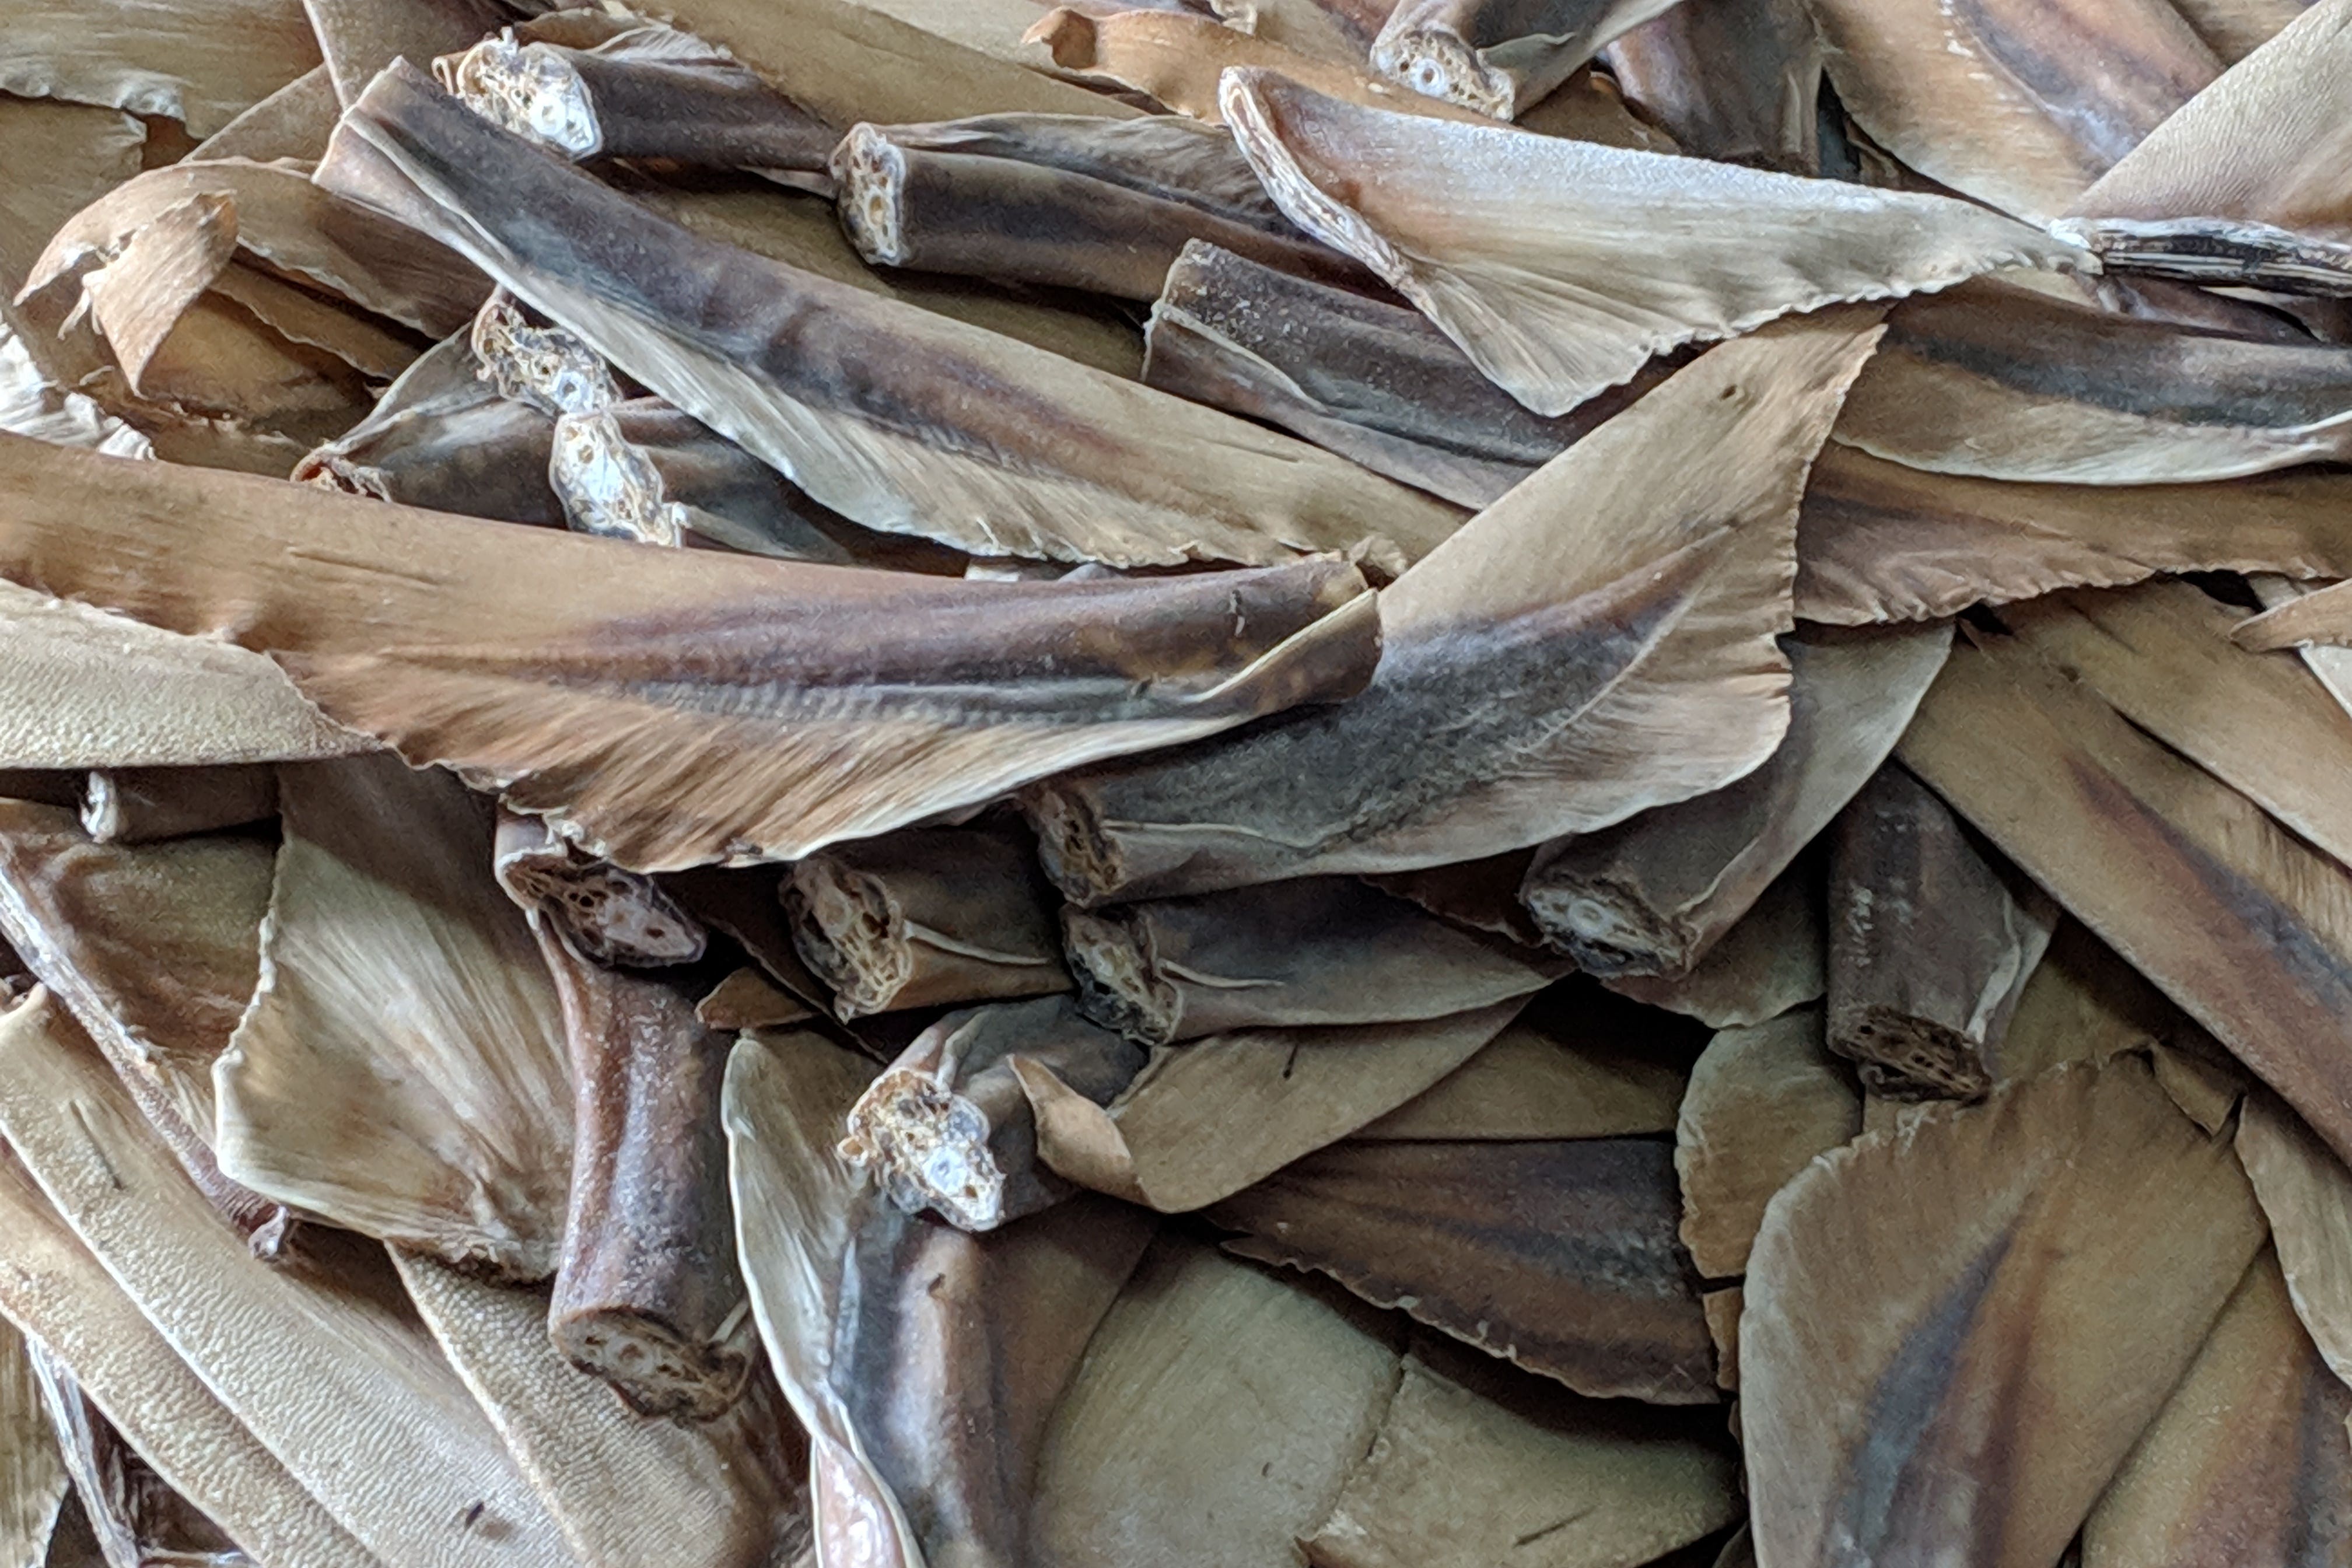 Detached shark fins found at an exporter facility in Indonesia in 2018, as part of an Illegal Wildlife Trade Challenge Fund project (Cefas/PA)